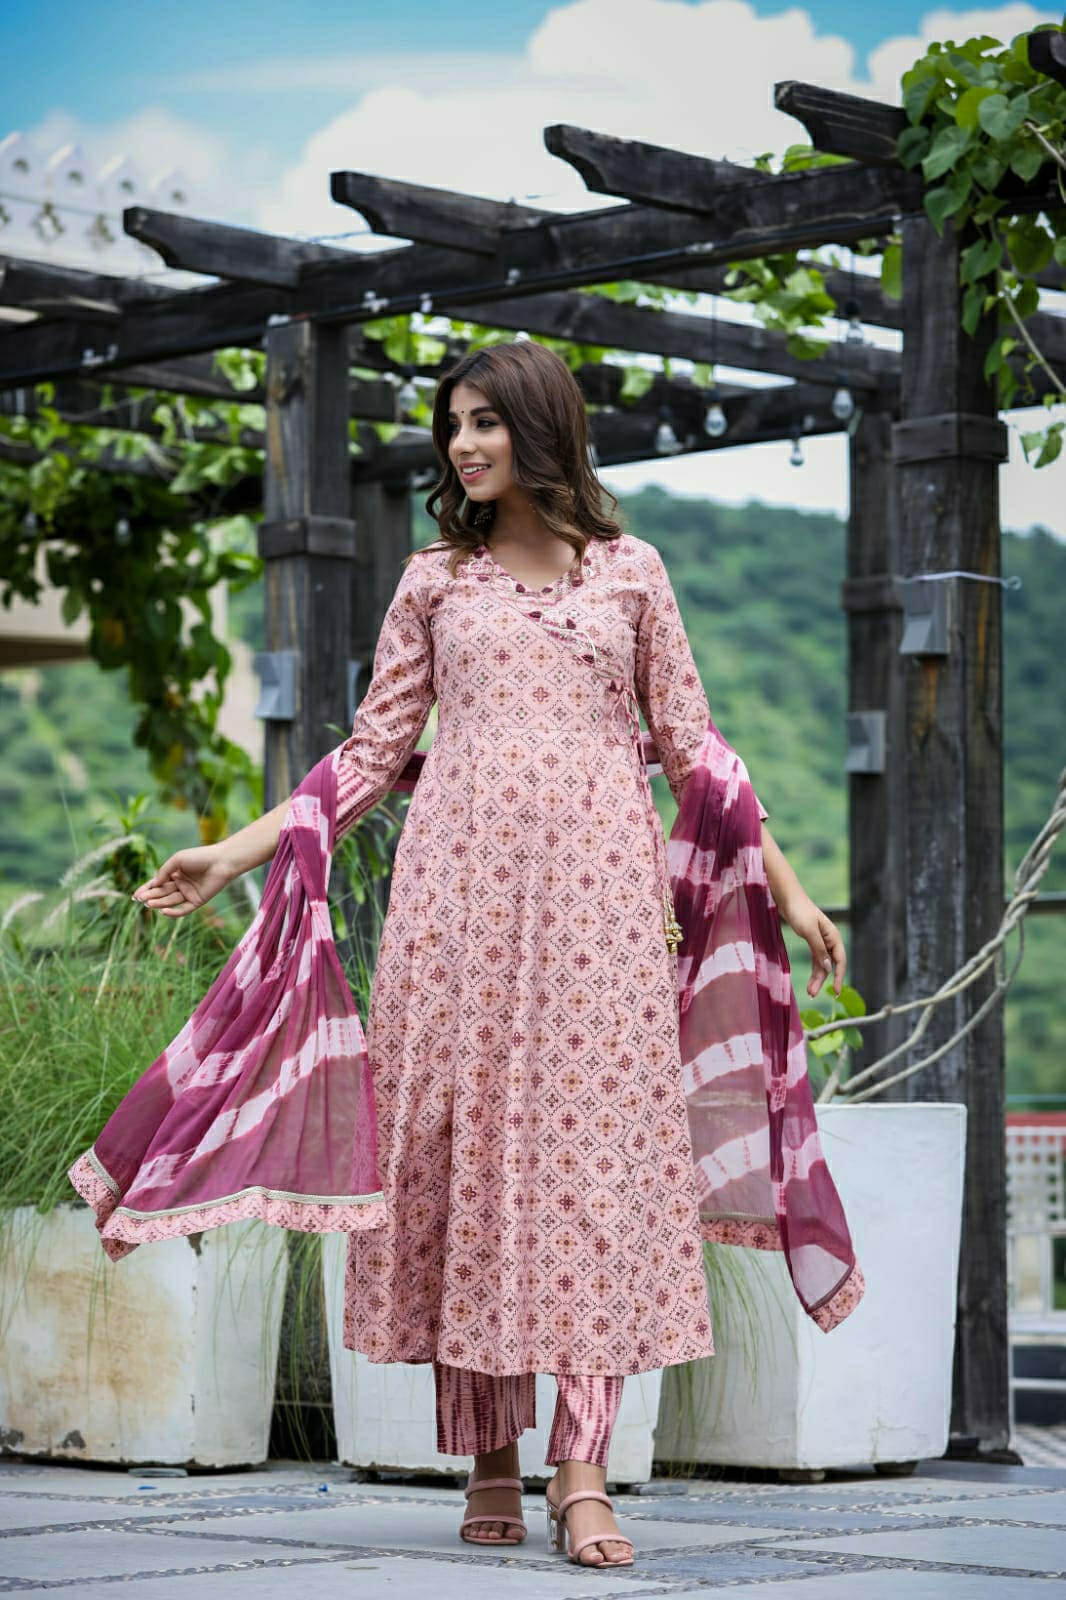 Timeless Elegance with Aaronee's Printed Latest Trends Dupatta Sets